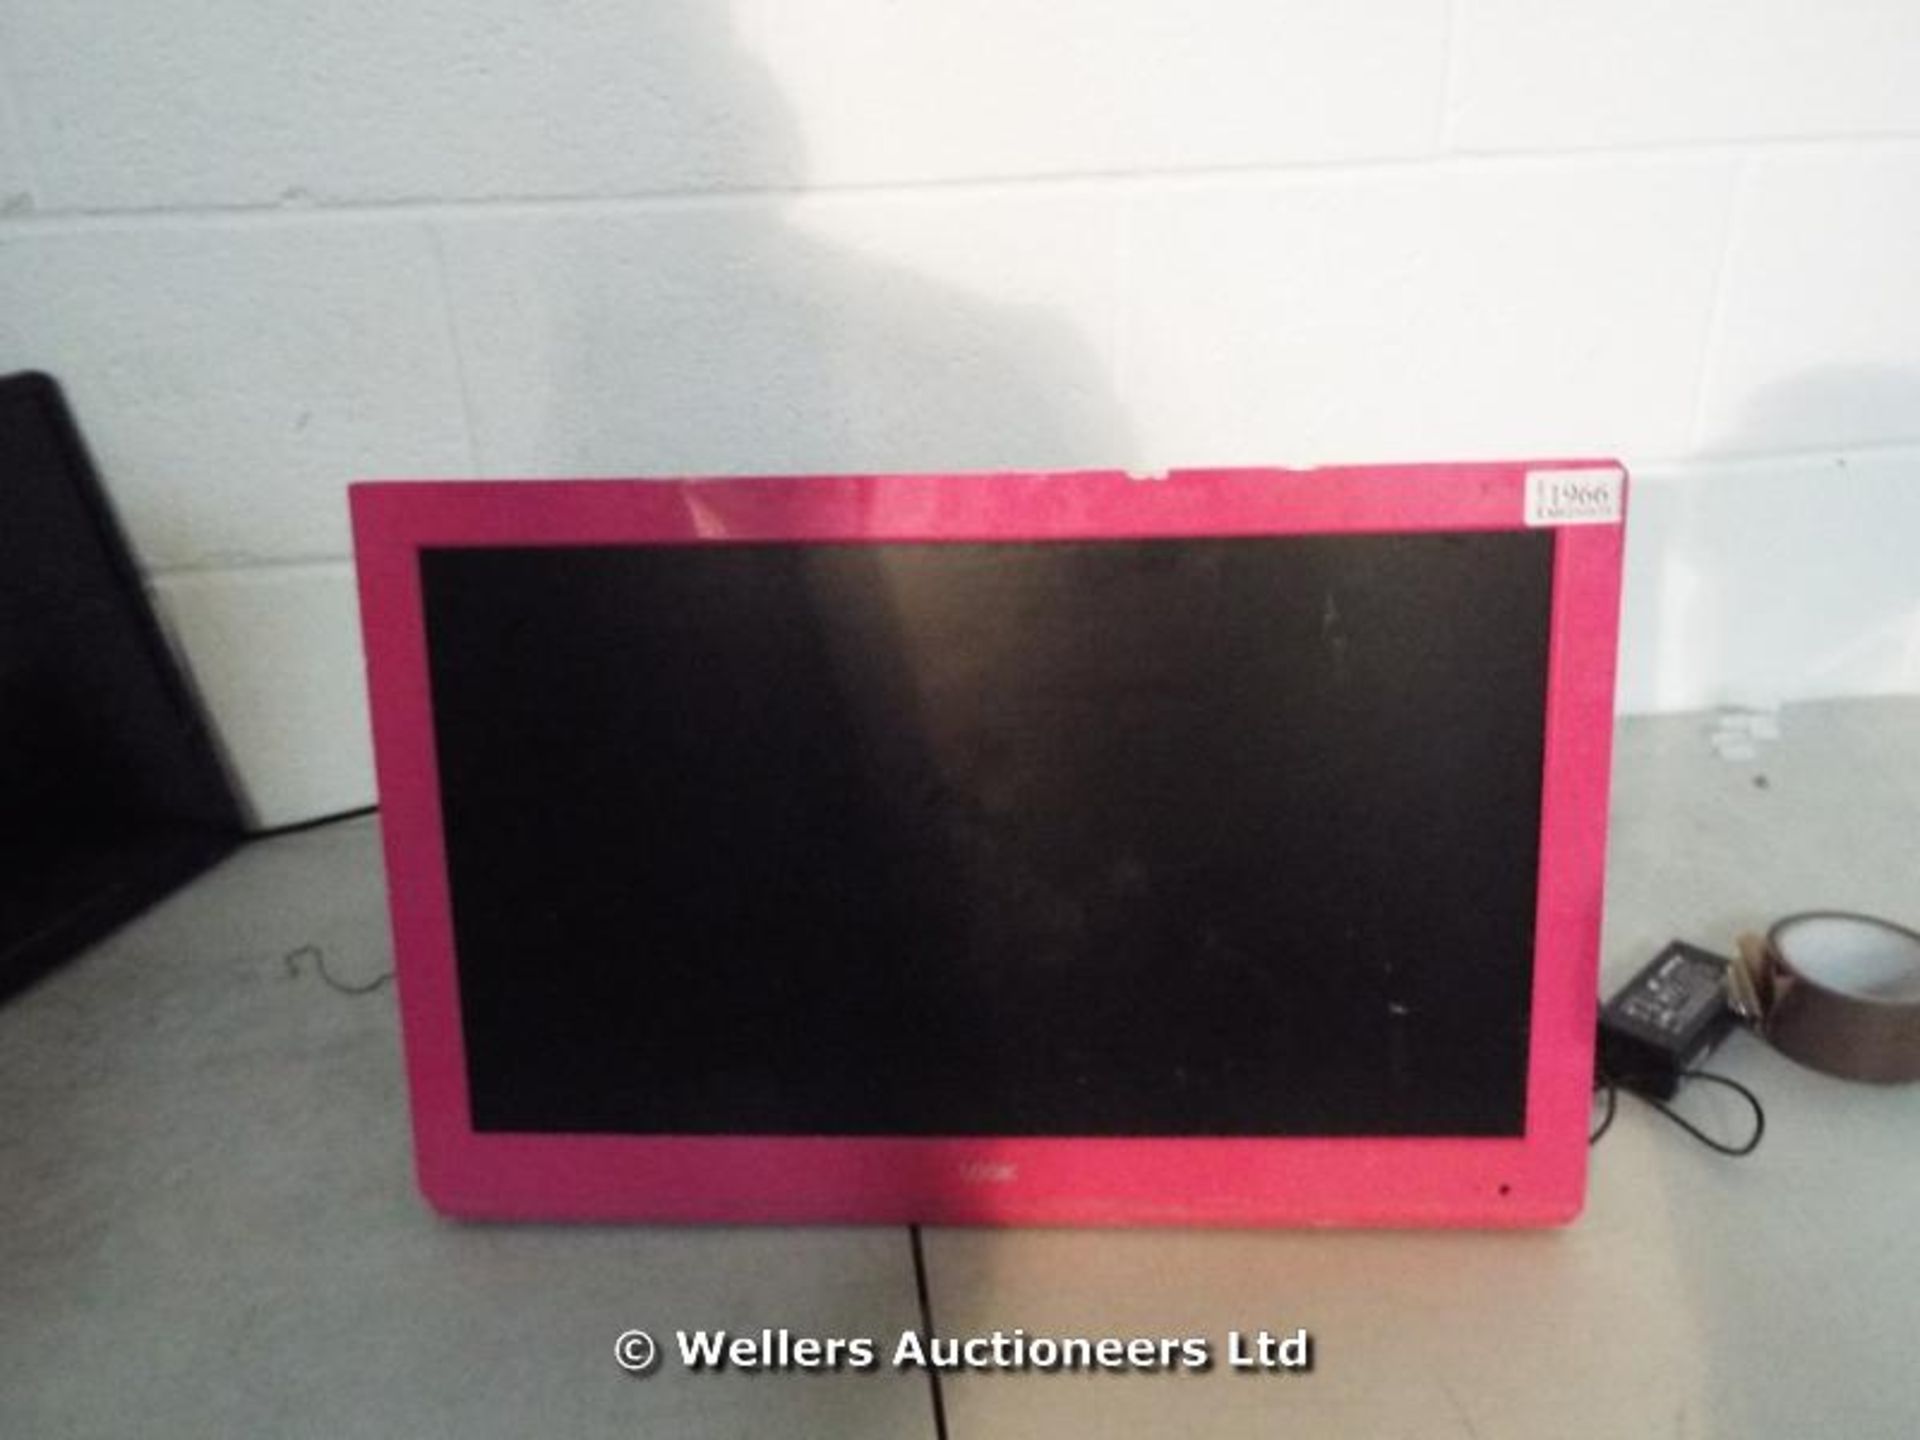 *"LOGIK L22FEDP12 PINK 22" LED HD TV WITH BUILT IN DVD PLAYER / POWER / PICTURE / REMOTE / STAND /